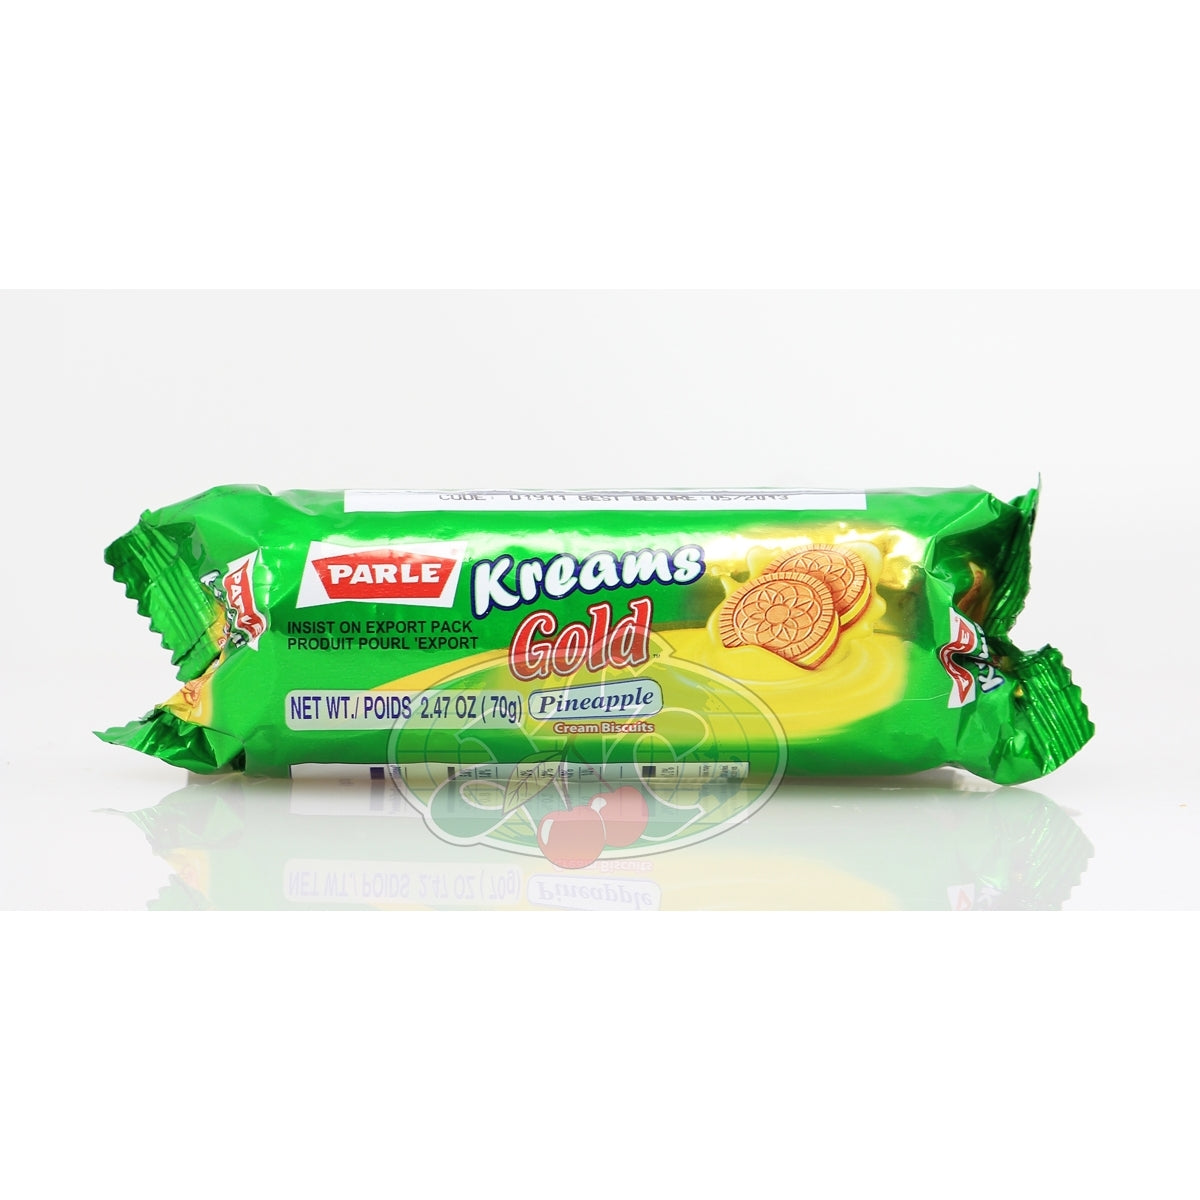 Parle Kream Gold Pineapple Cream Biscuits